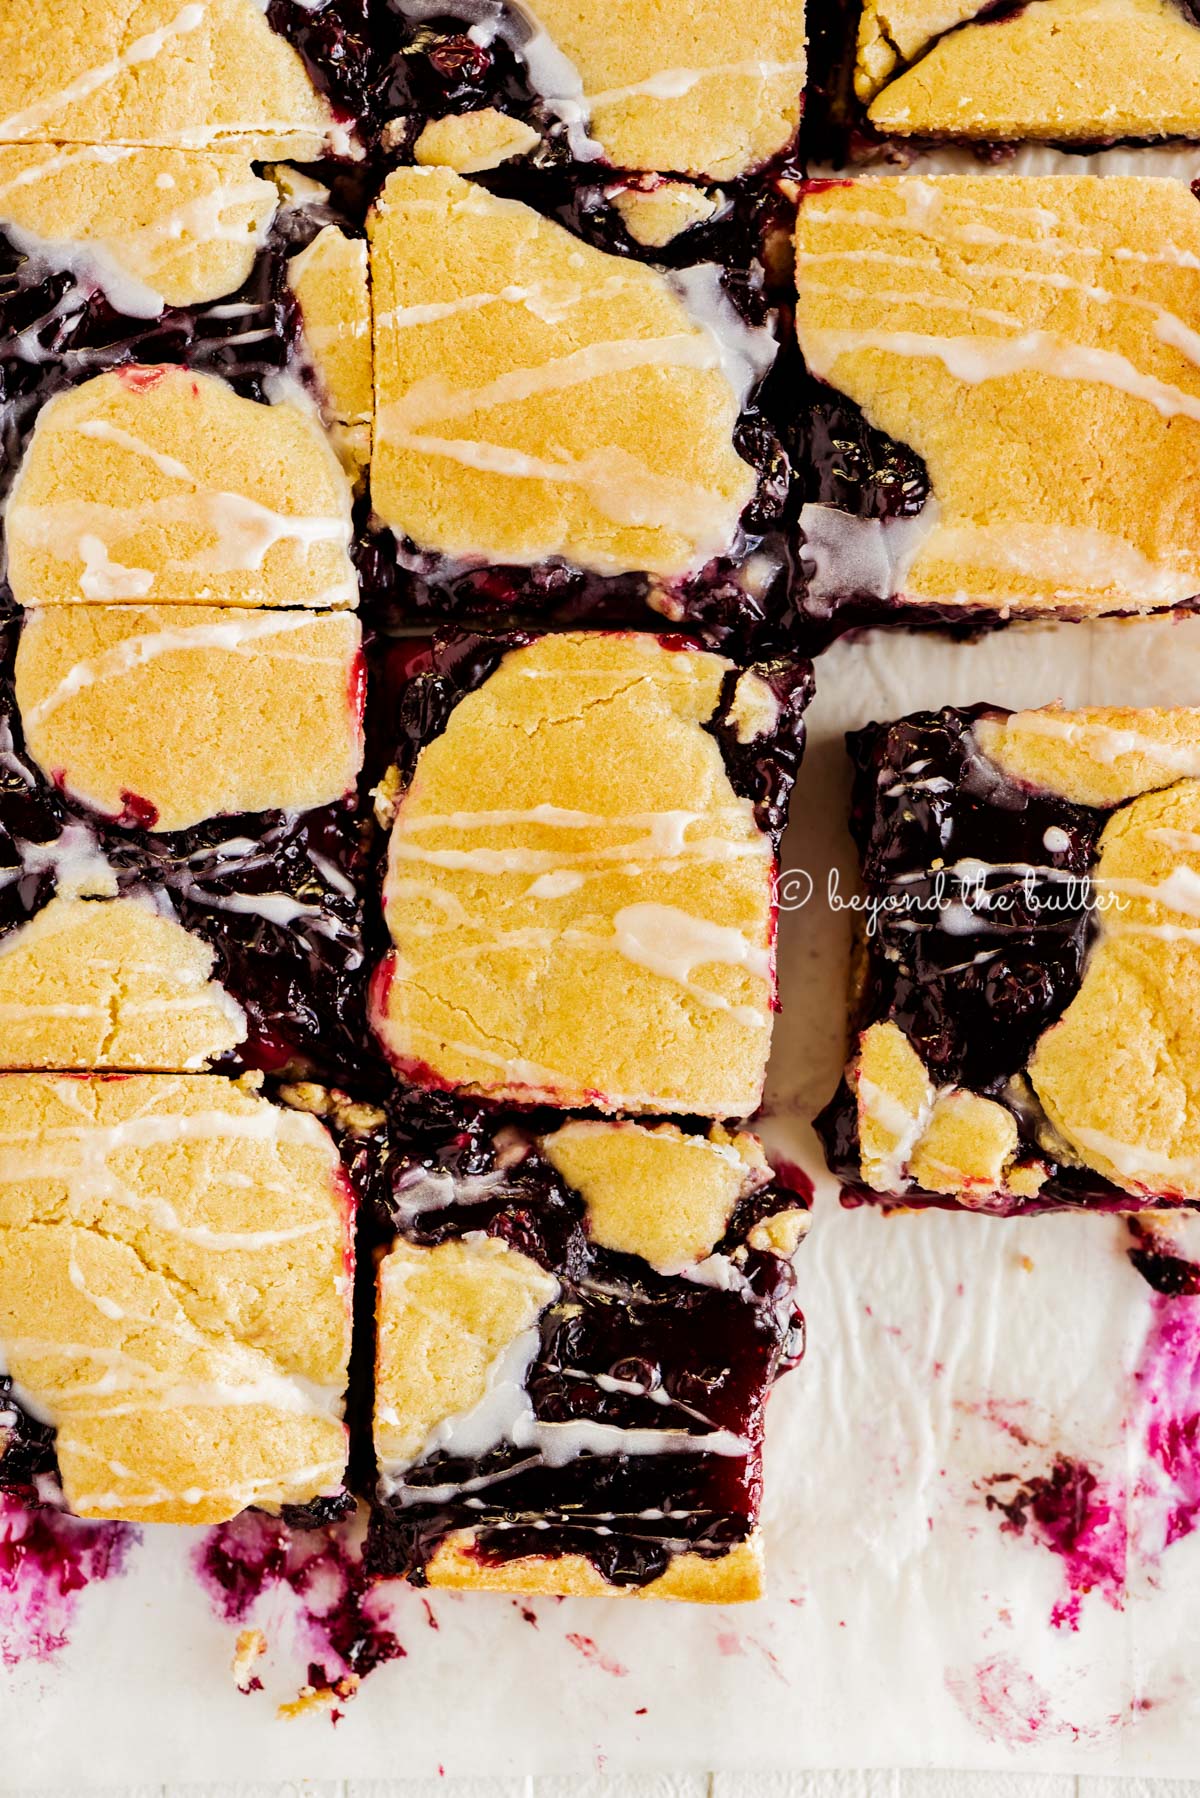 Blueberry swirl coffee cake squares on a white parchment paper background | All Images © Beyond the Butter®